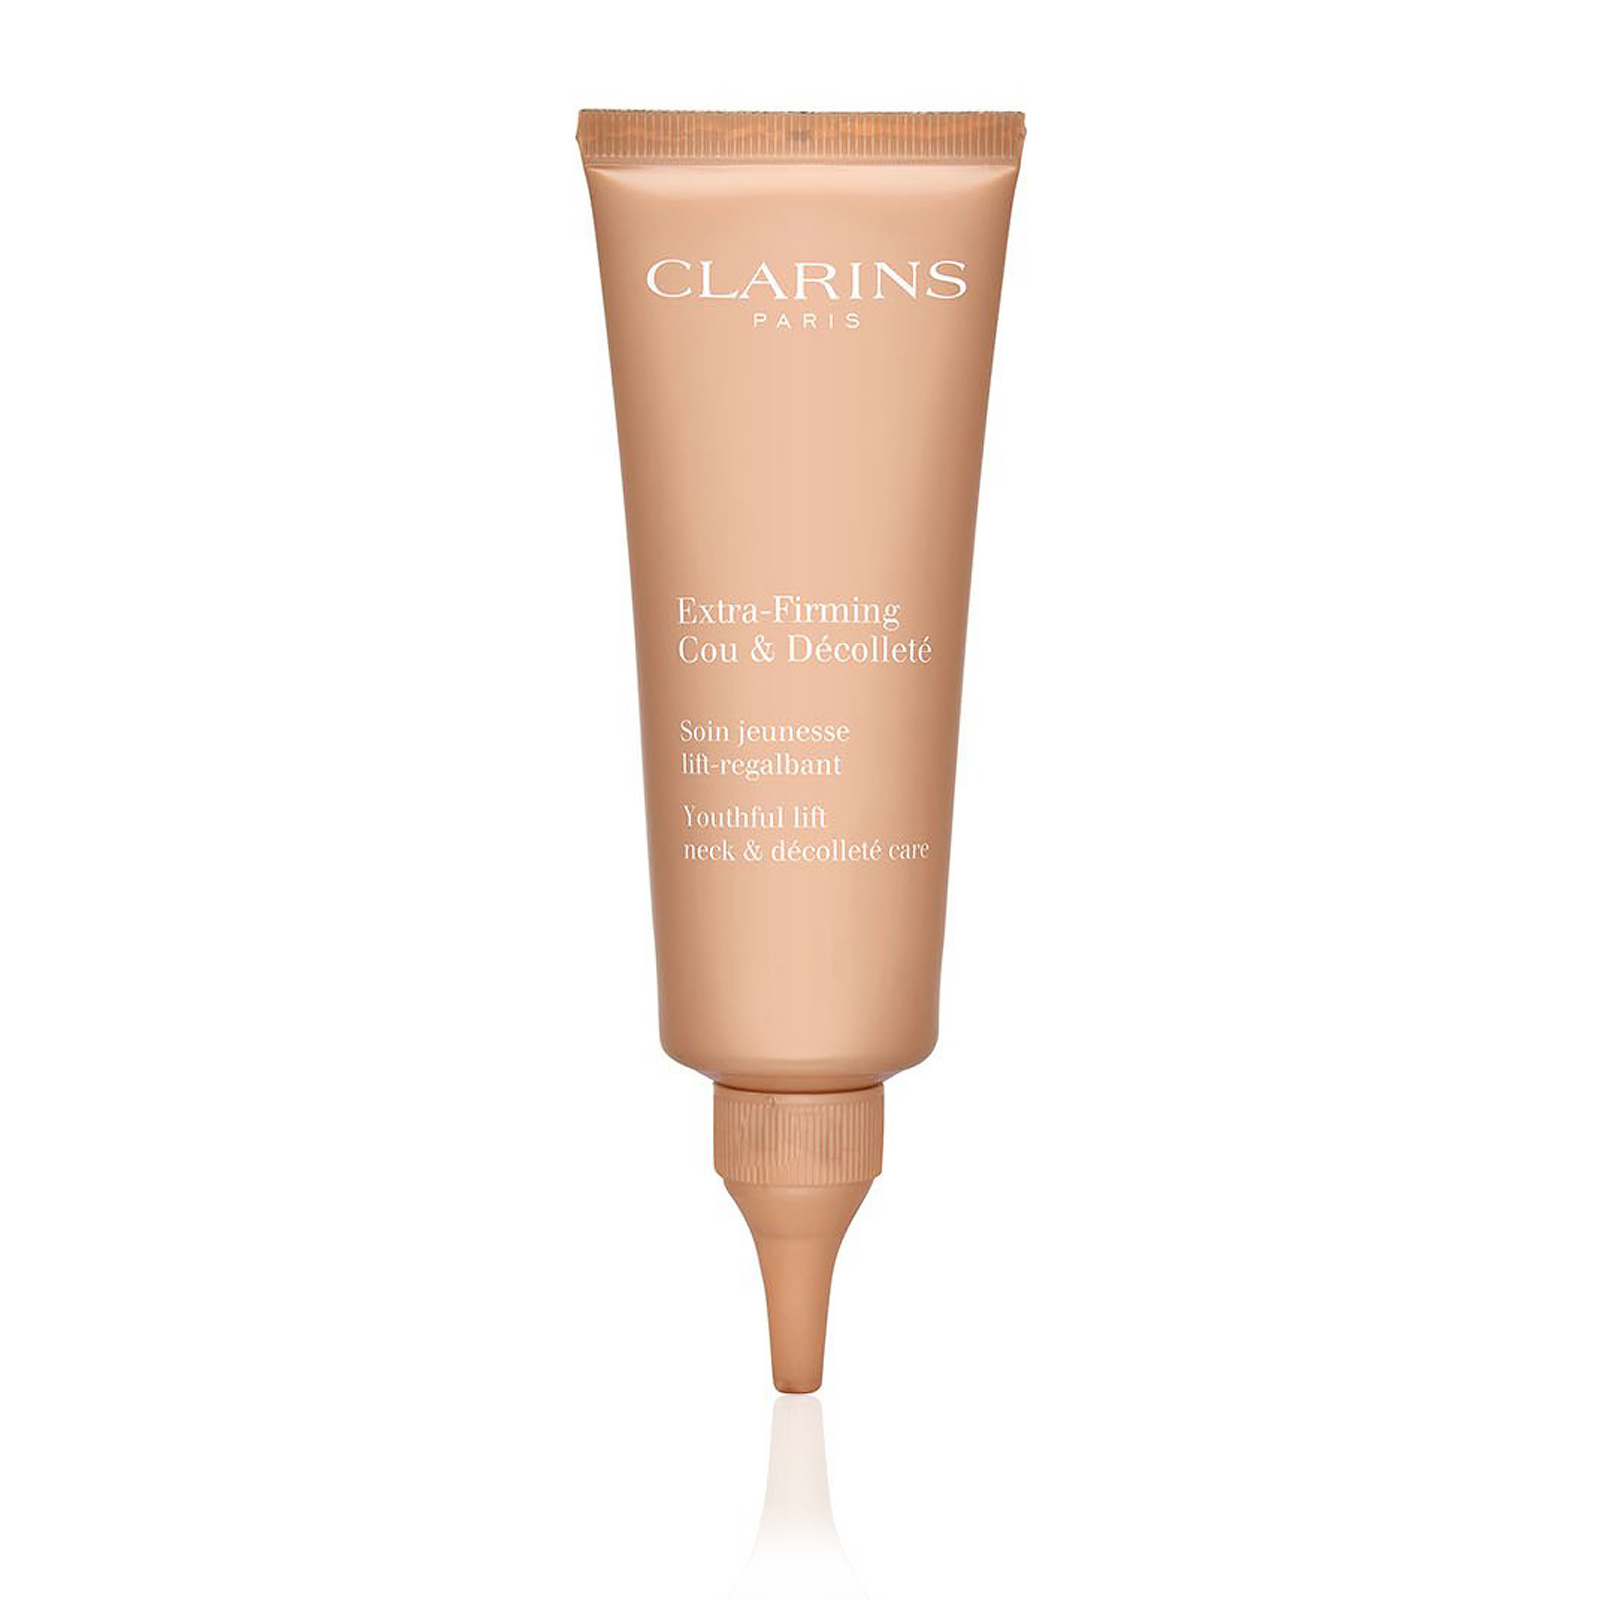 Clarins Body Fit Anti-Cellulite Contouring Expert – eCosmeticWorld